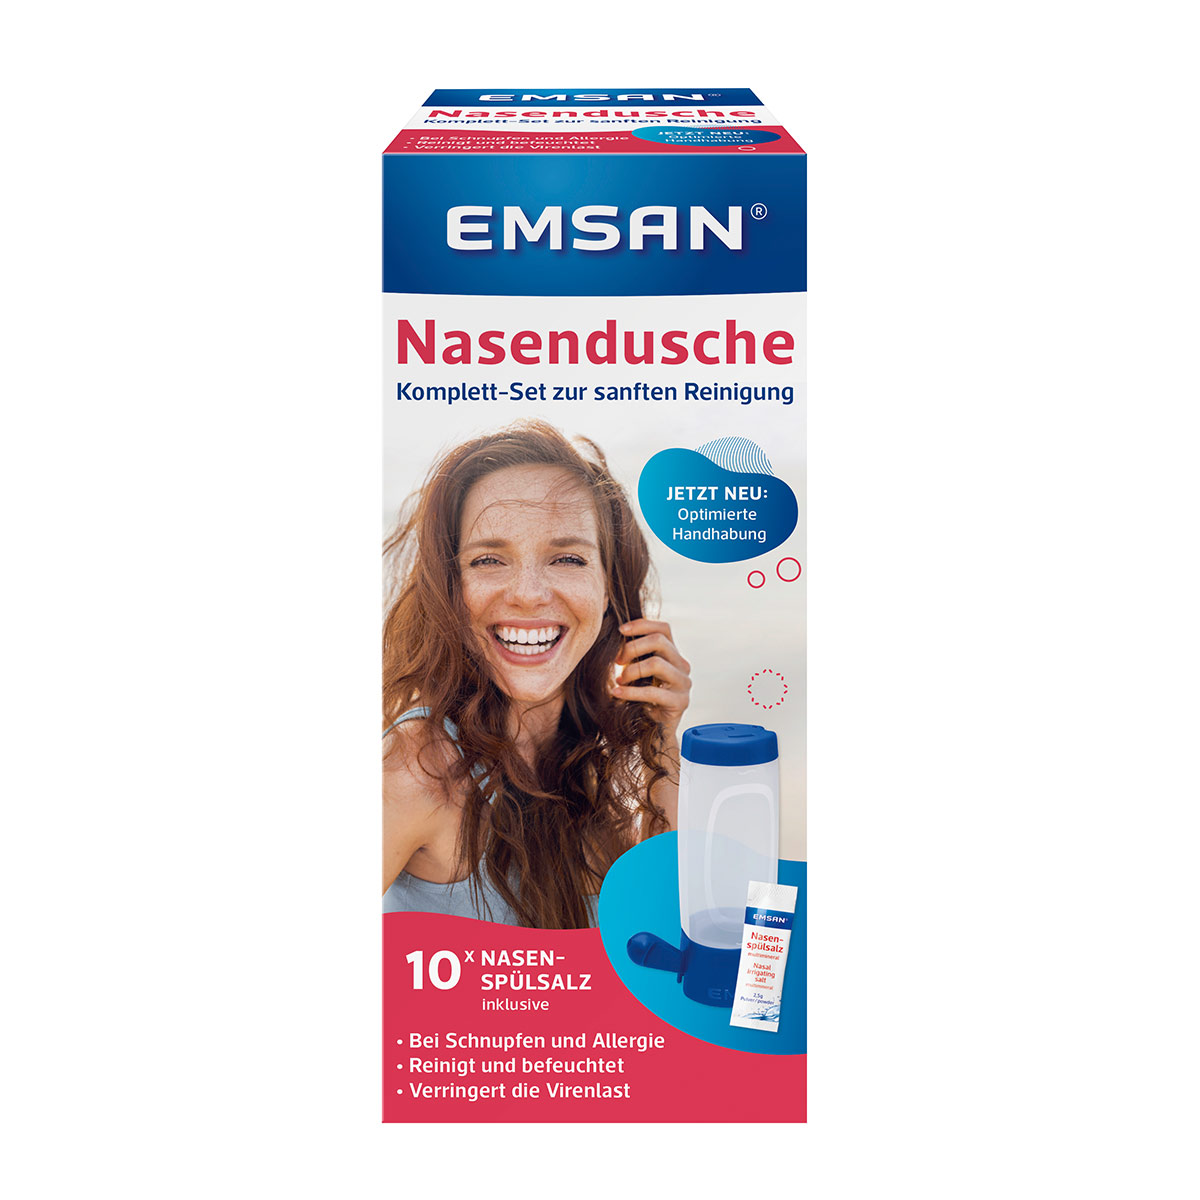 Emser Nasal Douche With 4 Bags Of Nasal Rinsing Salt - Cold & Flu 